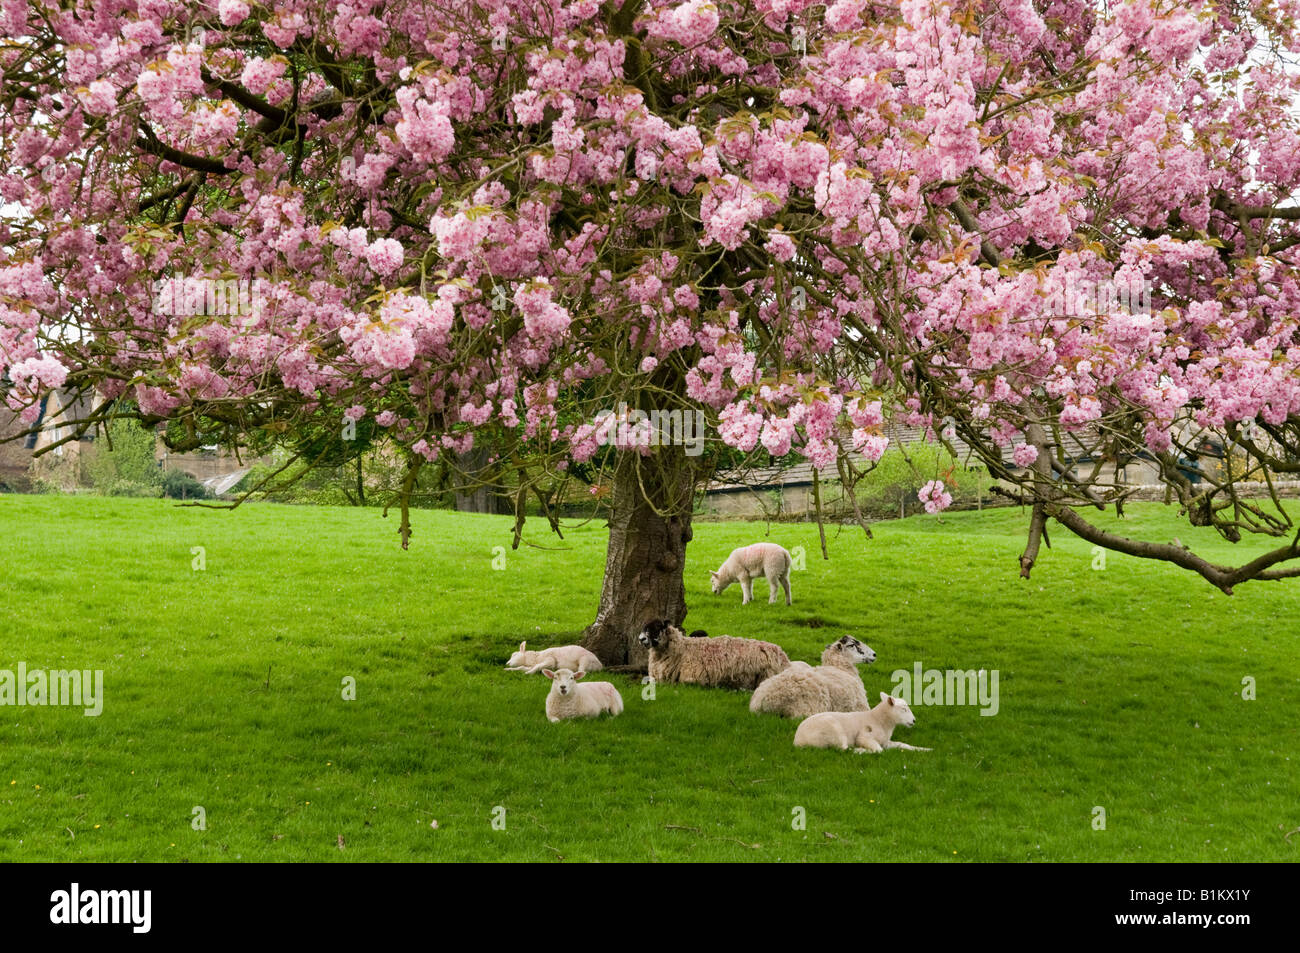 Sheep and lambs resting under a cherry blossom tree in Derbyshire Stock Photo